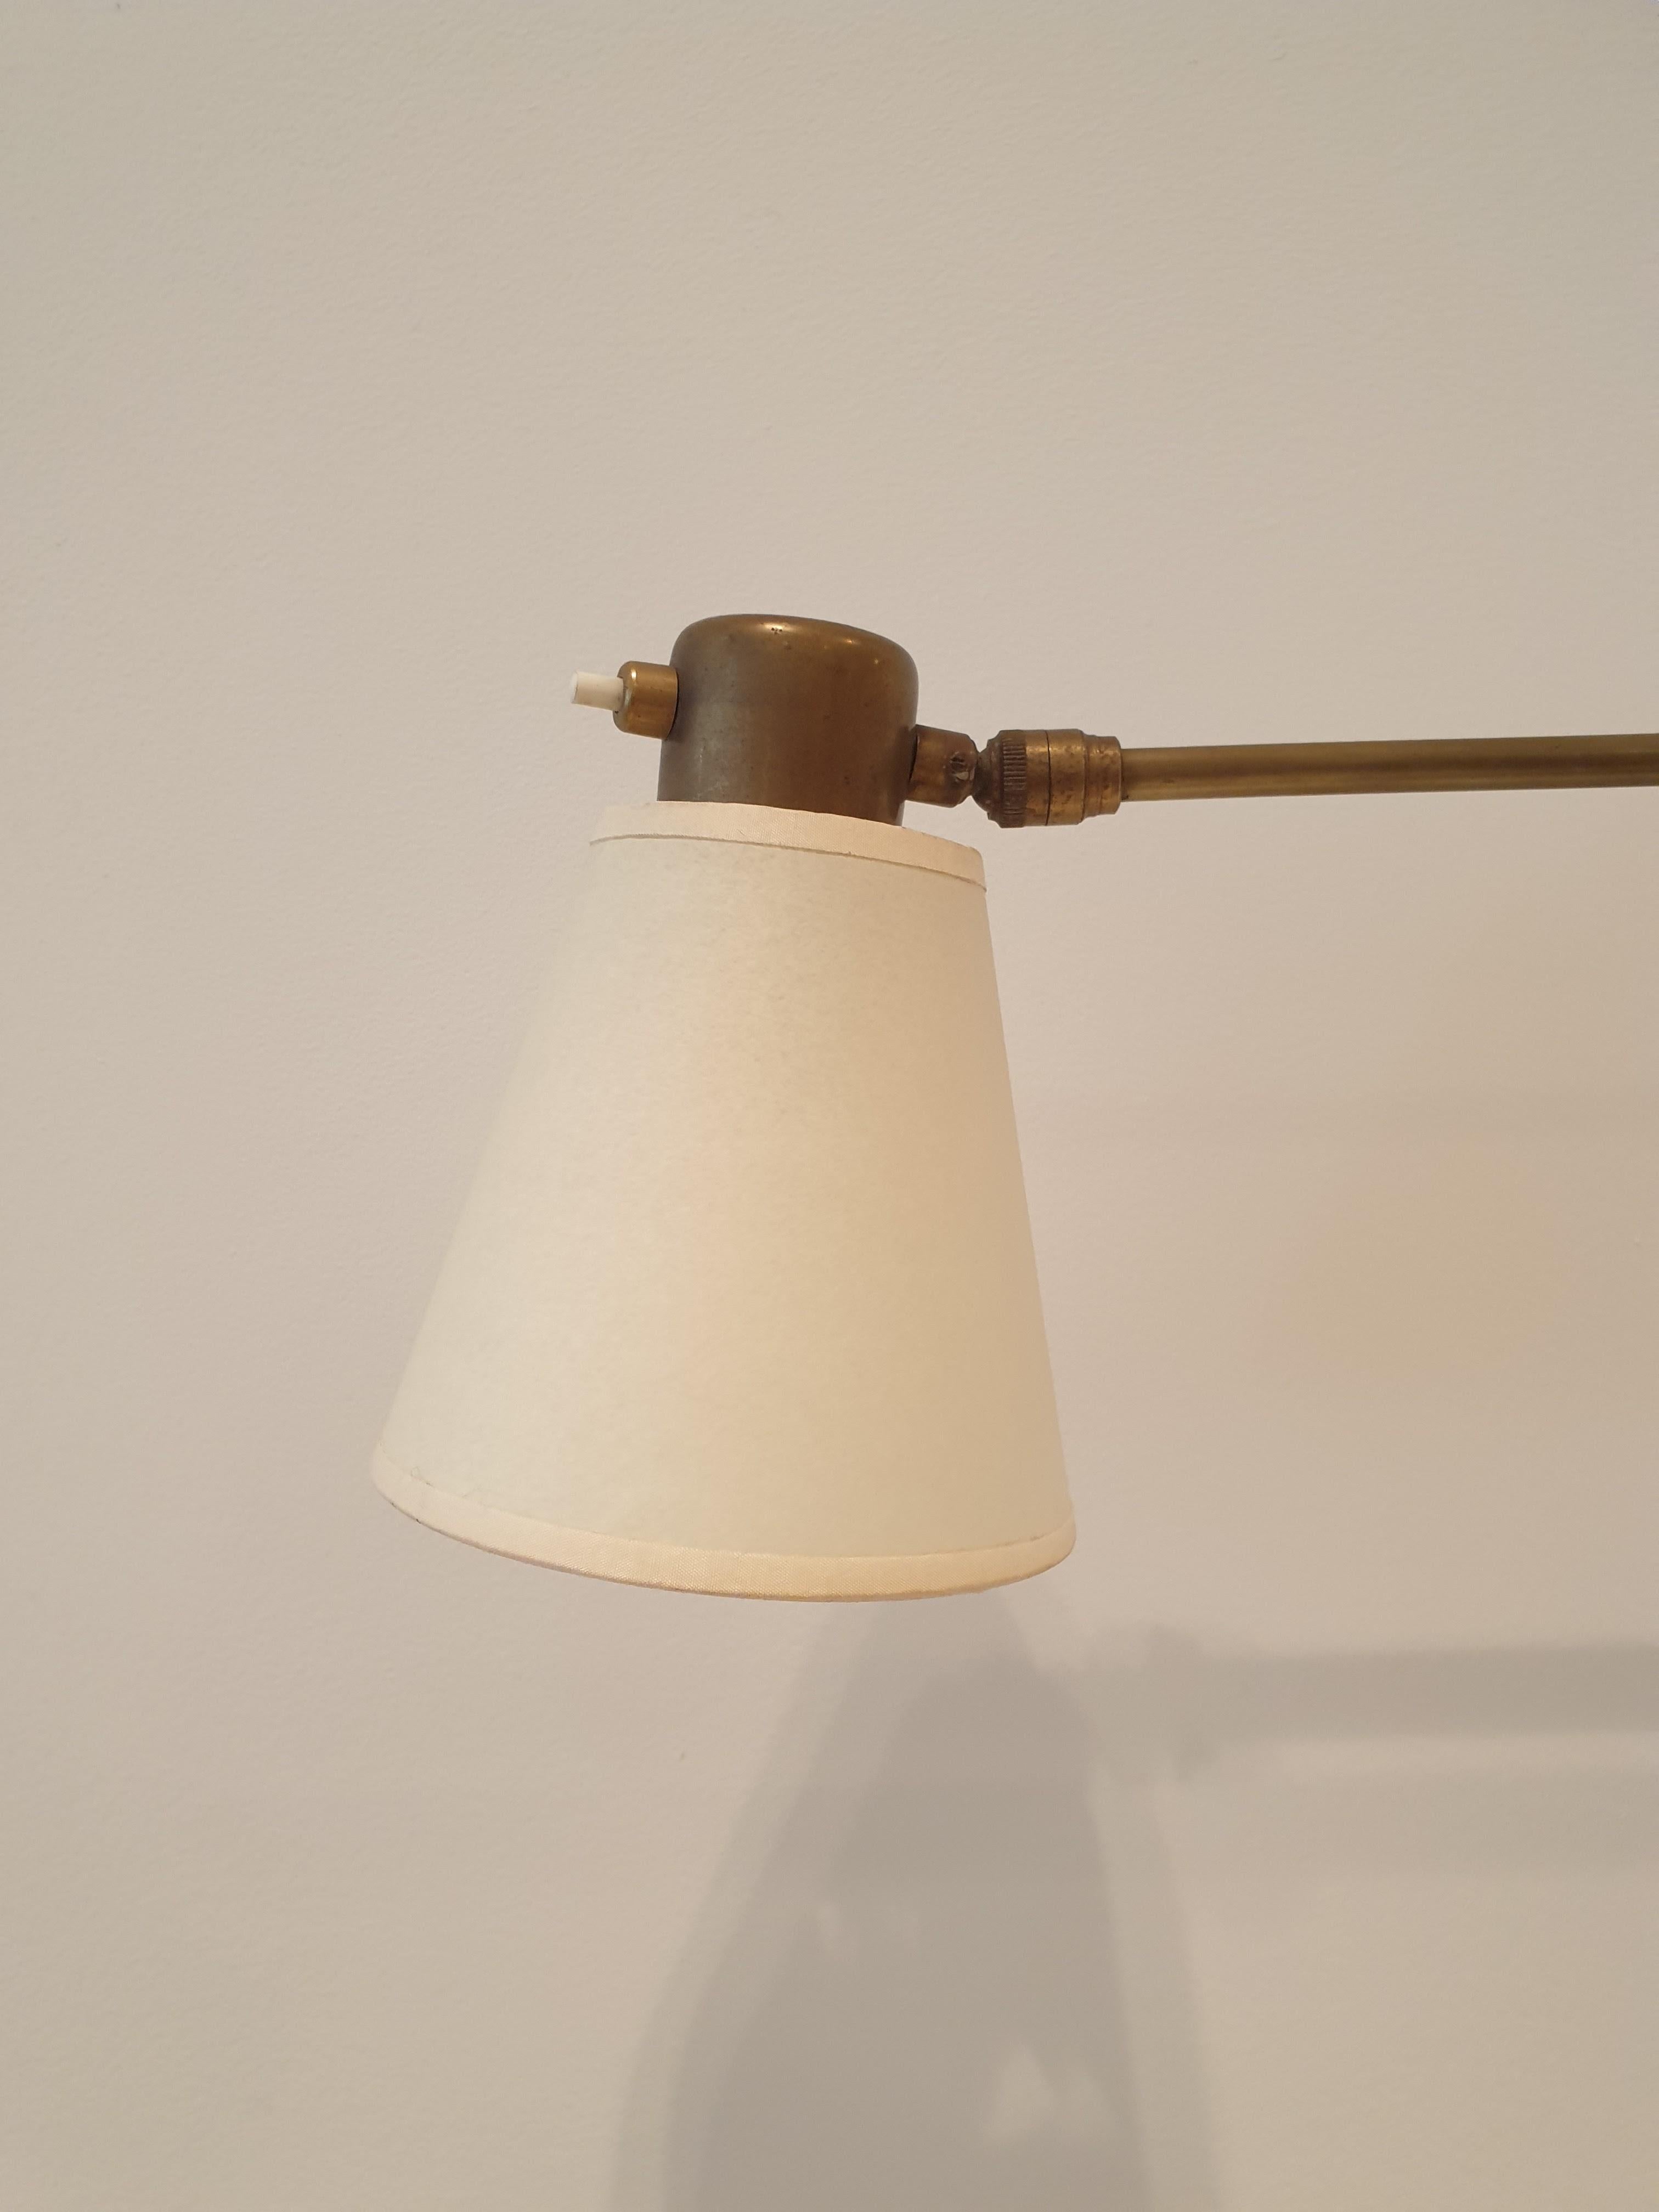 Useful patinated brass articulated wallight with bespoke parchment shade. The shade tilts and the arm can be folded back against the wall if required. It makes an excellent reading light or light over the bed as it can be folded against the wall. It